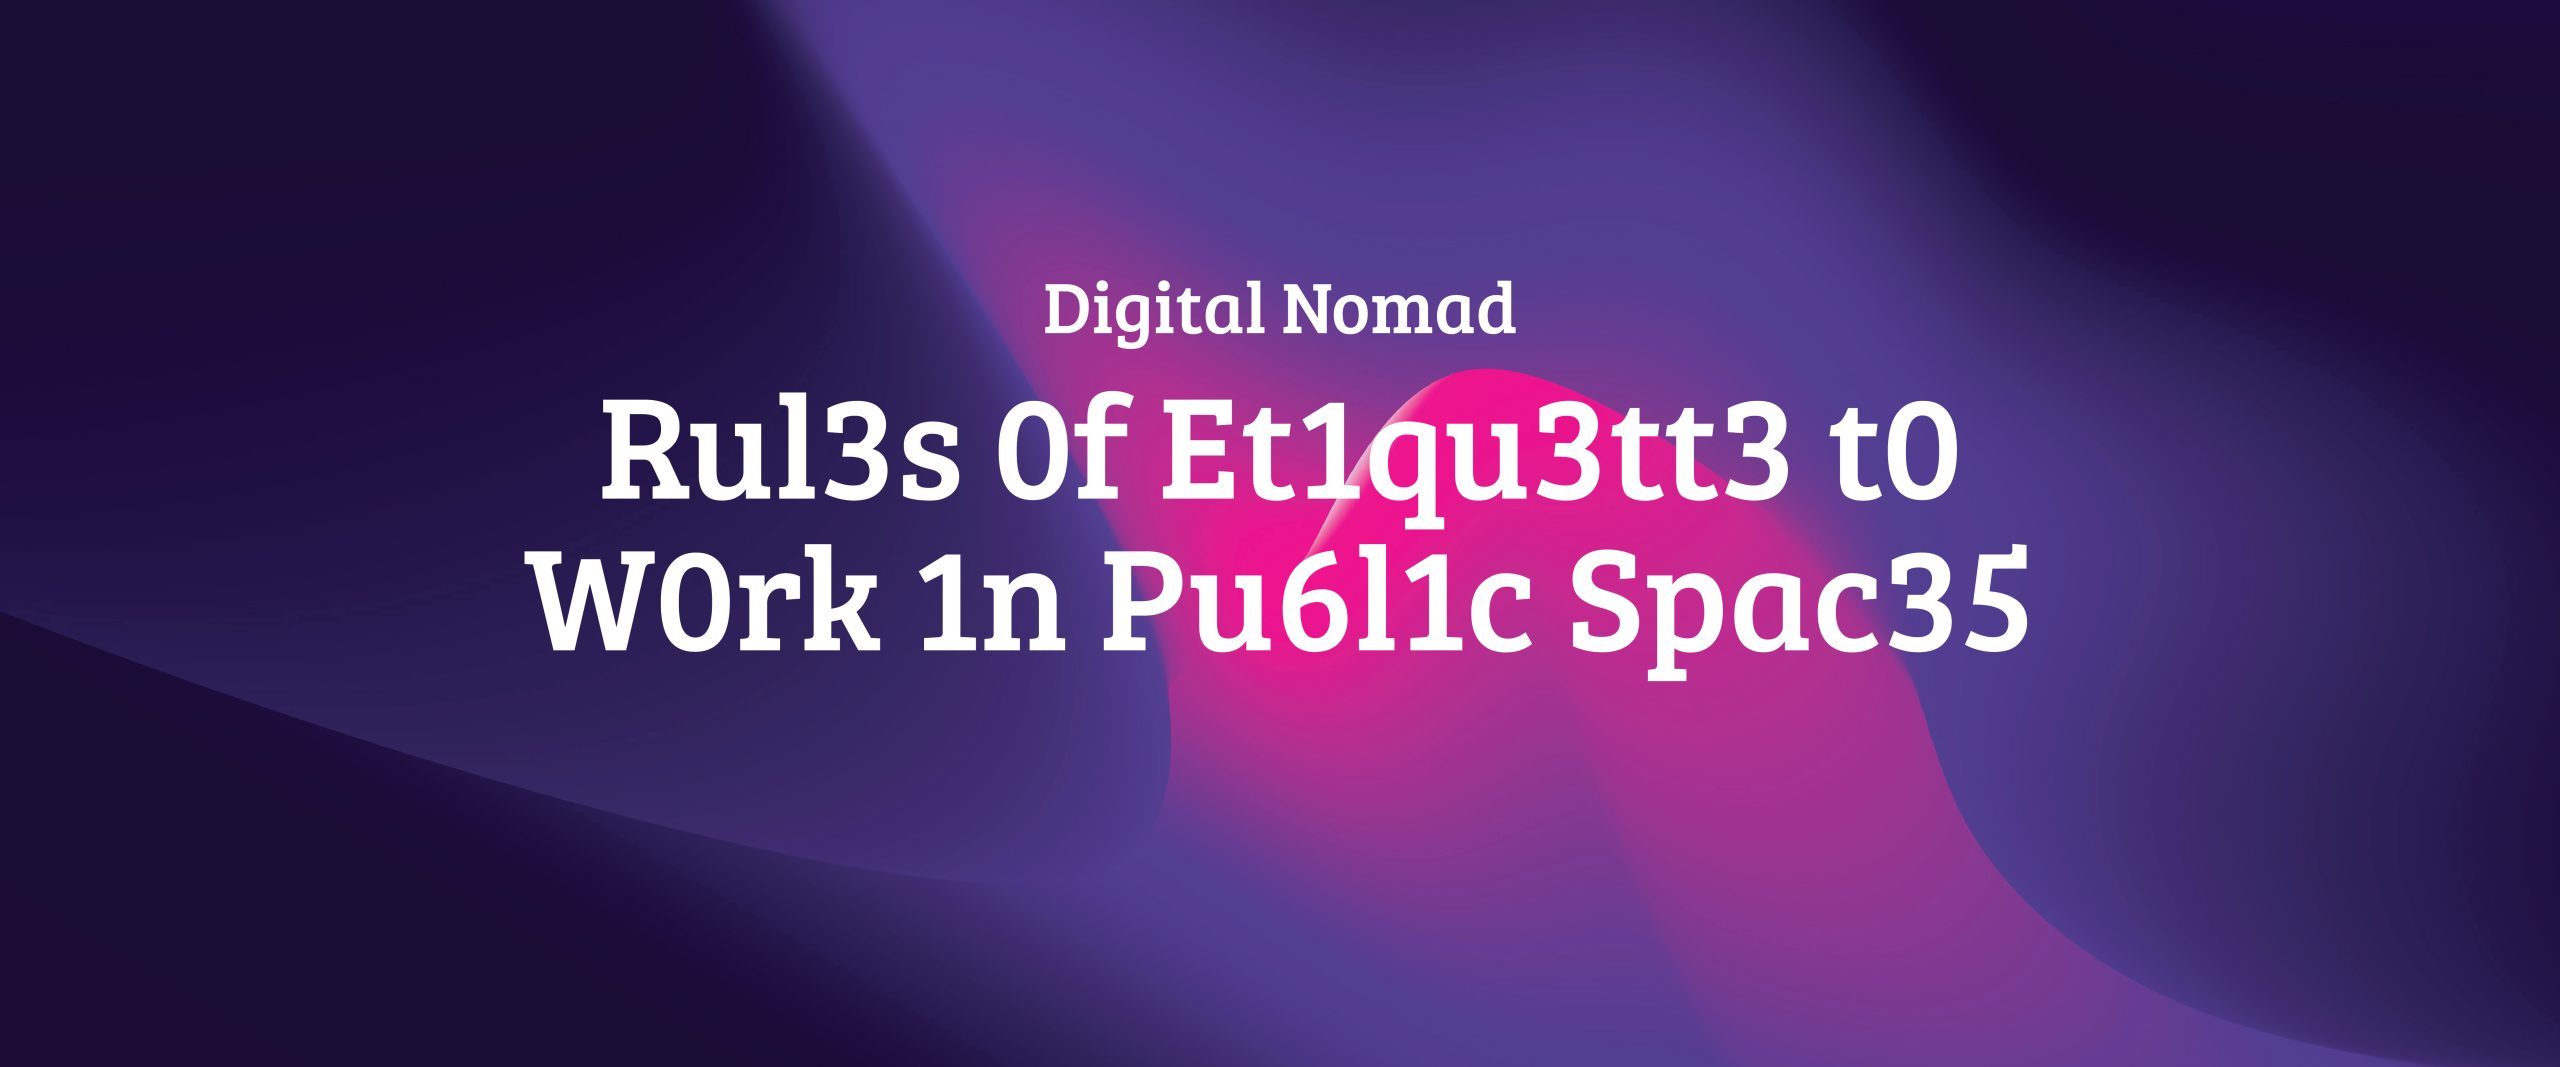 Digital Nomad Rules of Etiquette to Work in Public Spaces